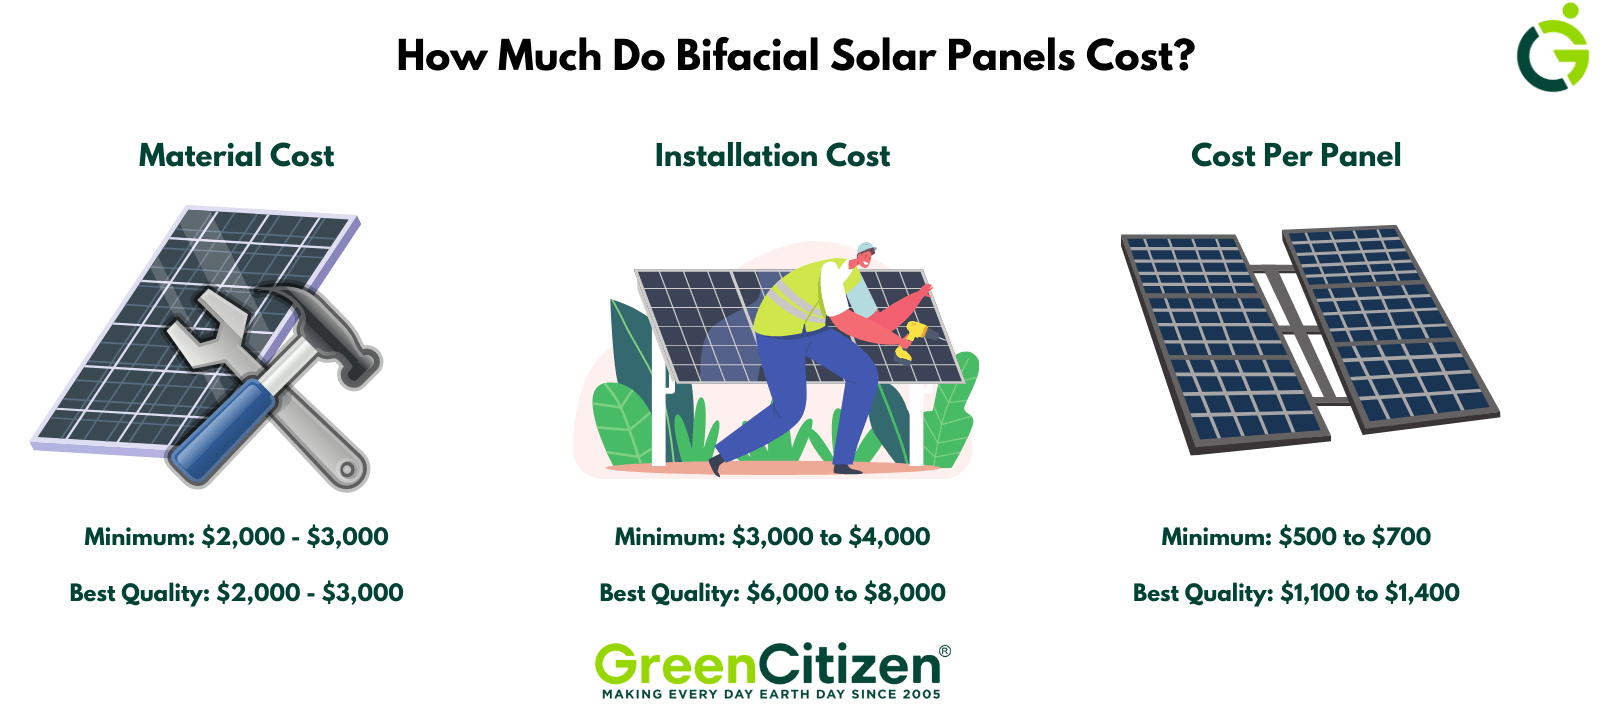 How Much Do Bifacial Solar Panels Cost